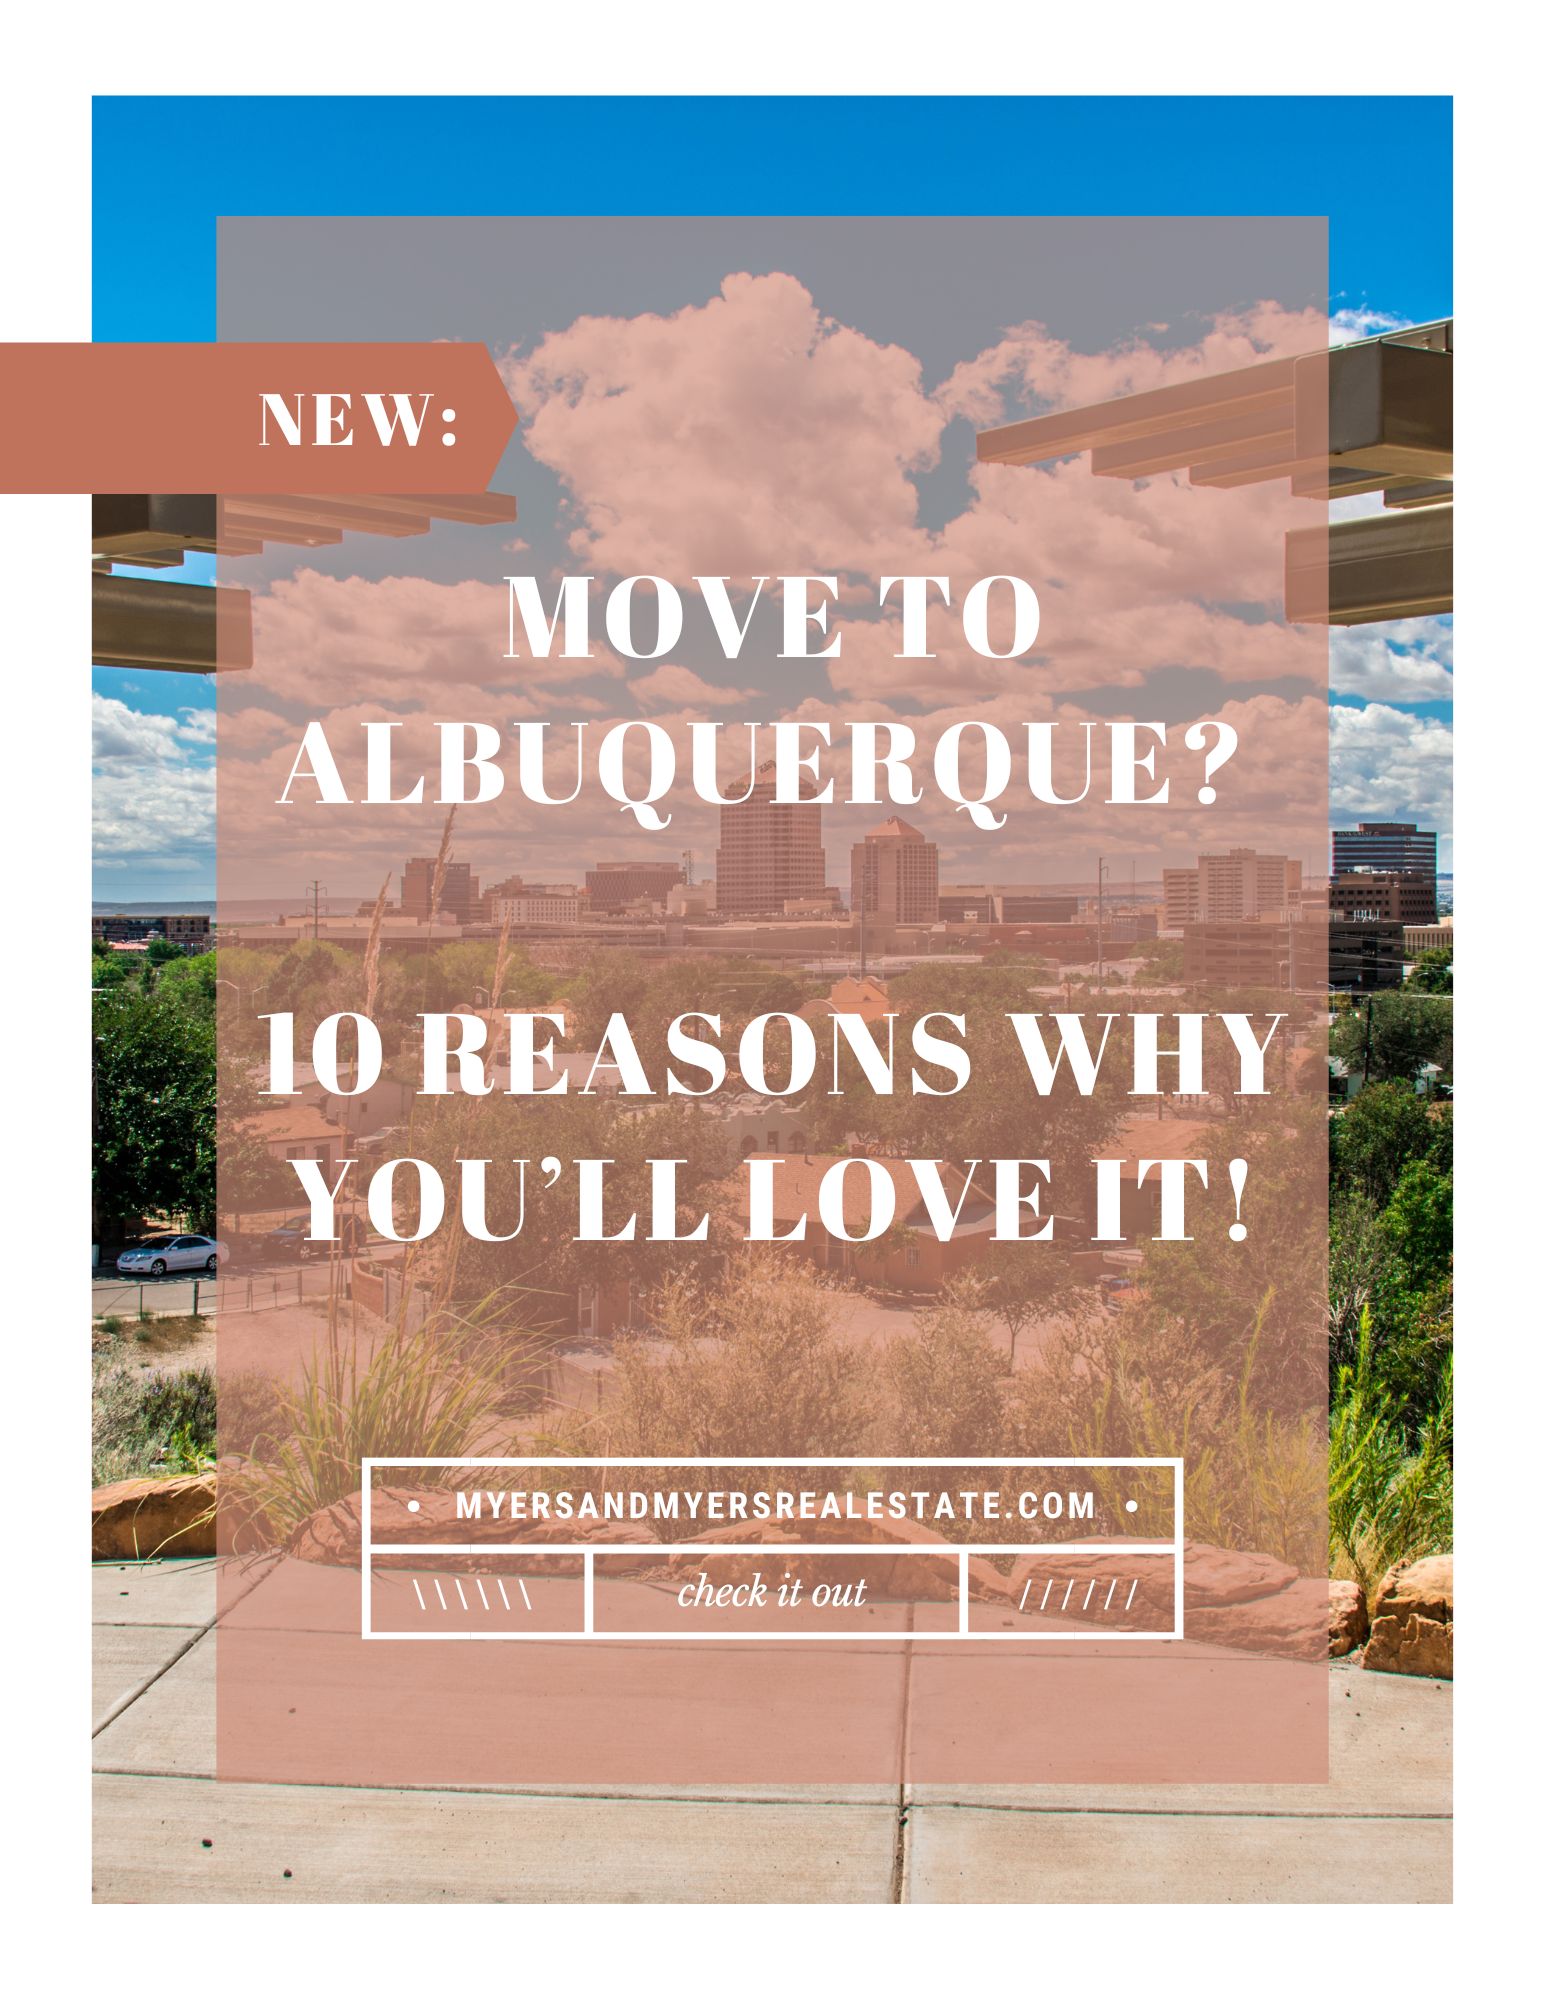 Move To Albuquerque? 10 Reasons Why You’ll Love it!